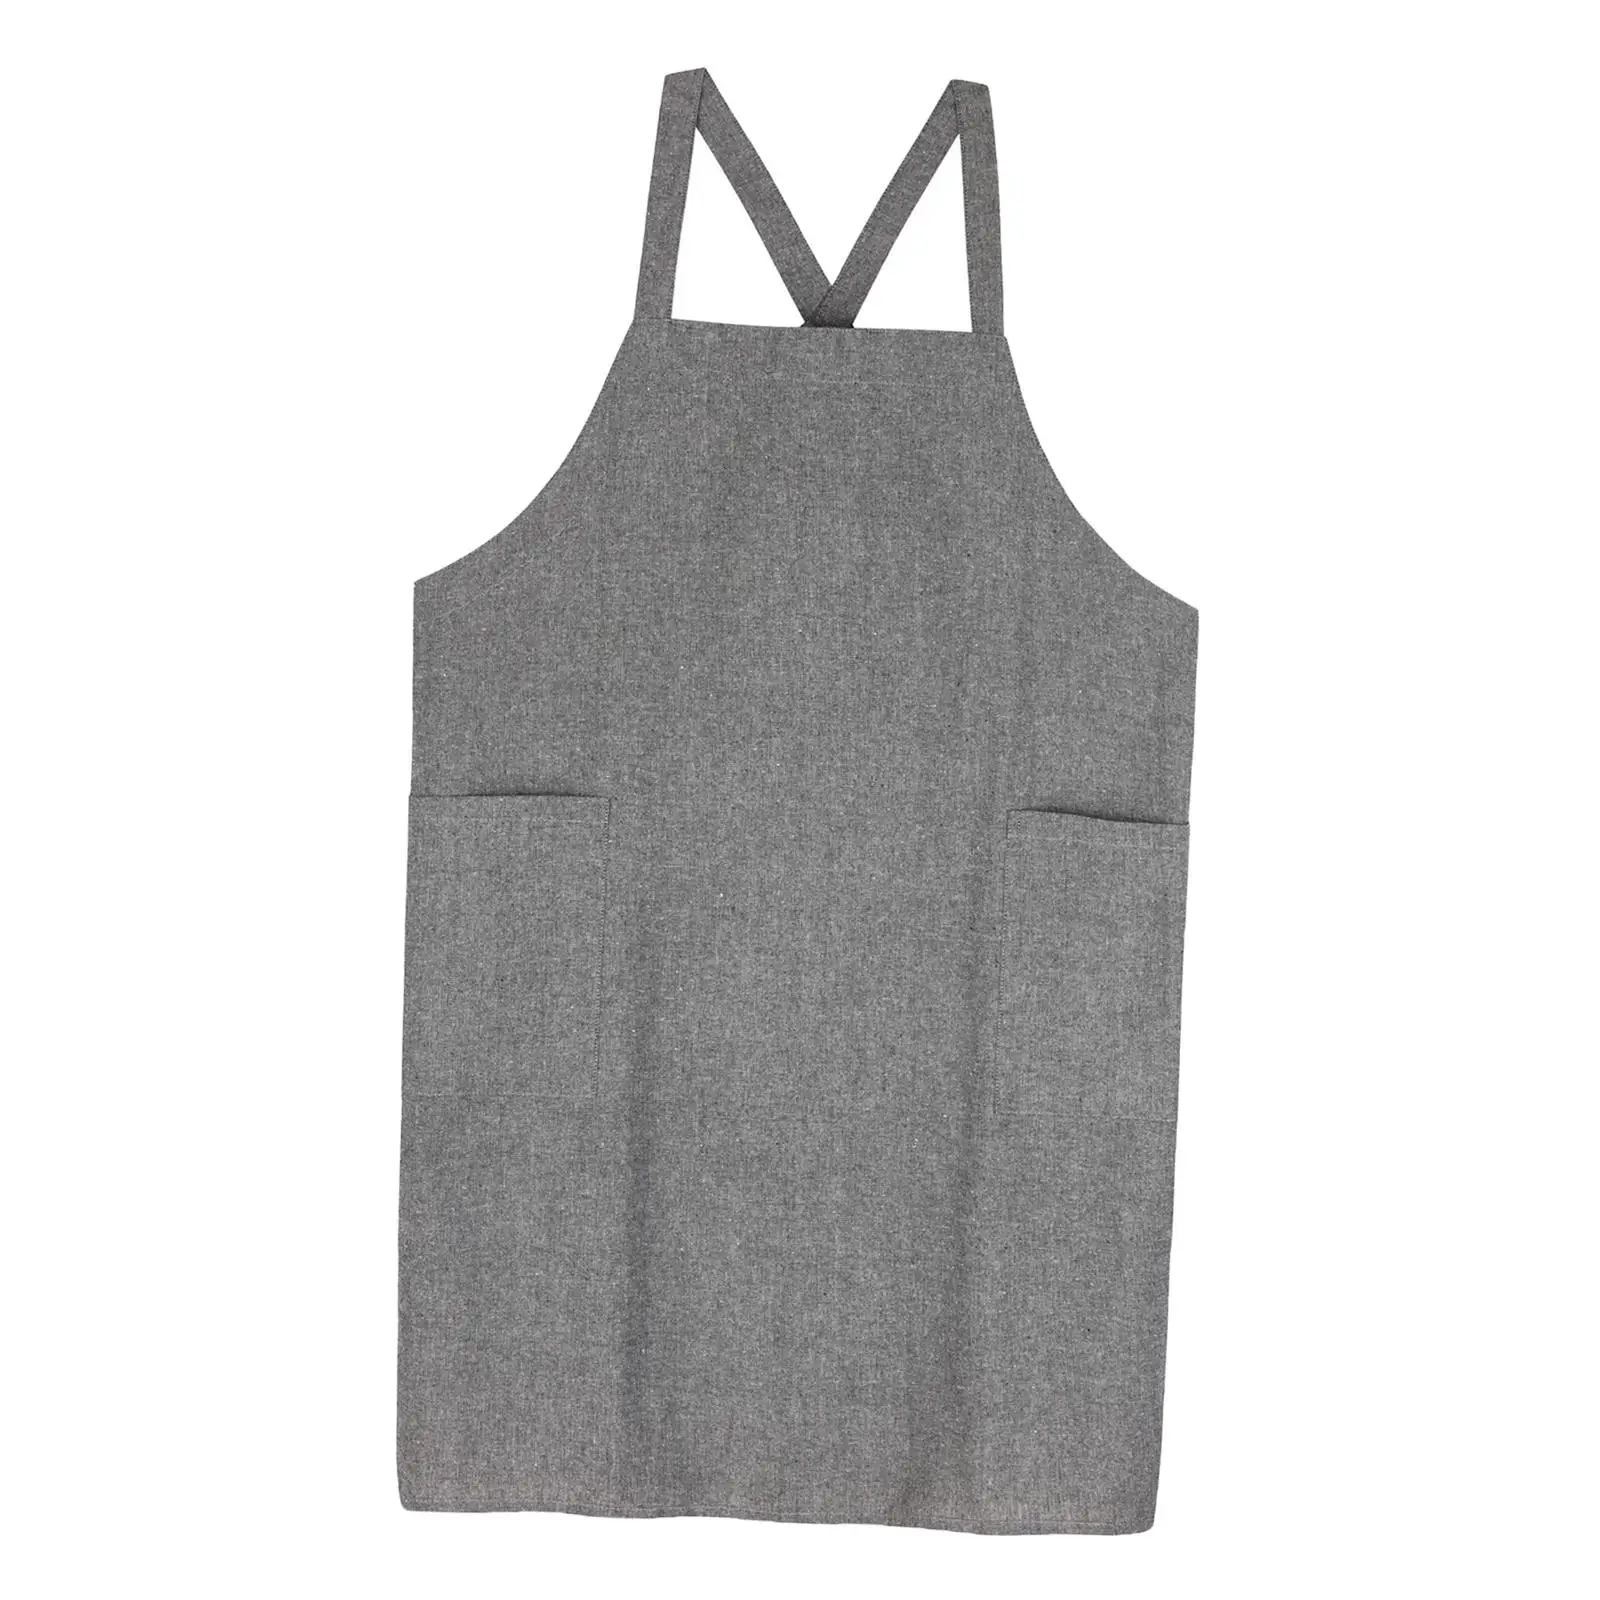 Cotton Kitchen Apron Barista Apron Professional Cooking Gardening Painting for Chef